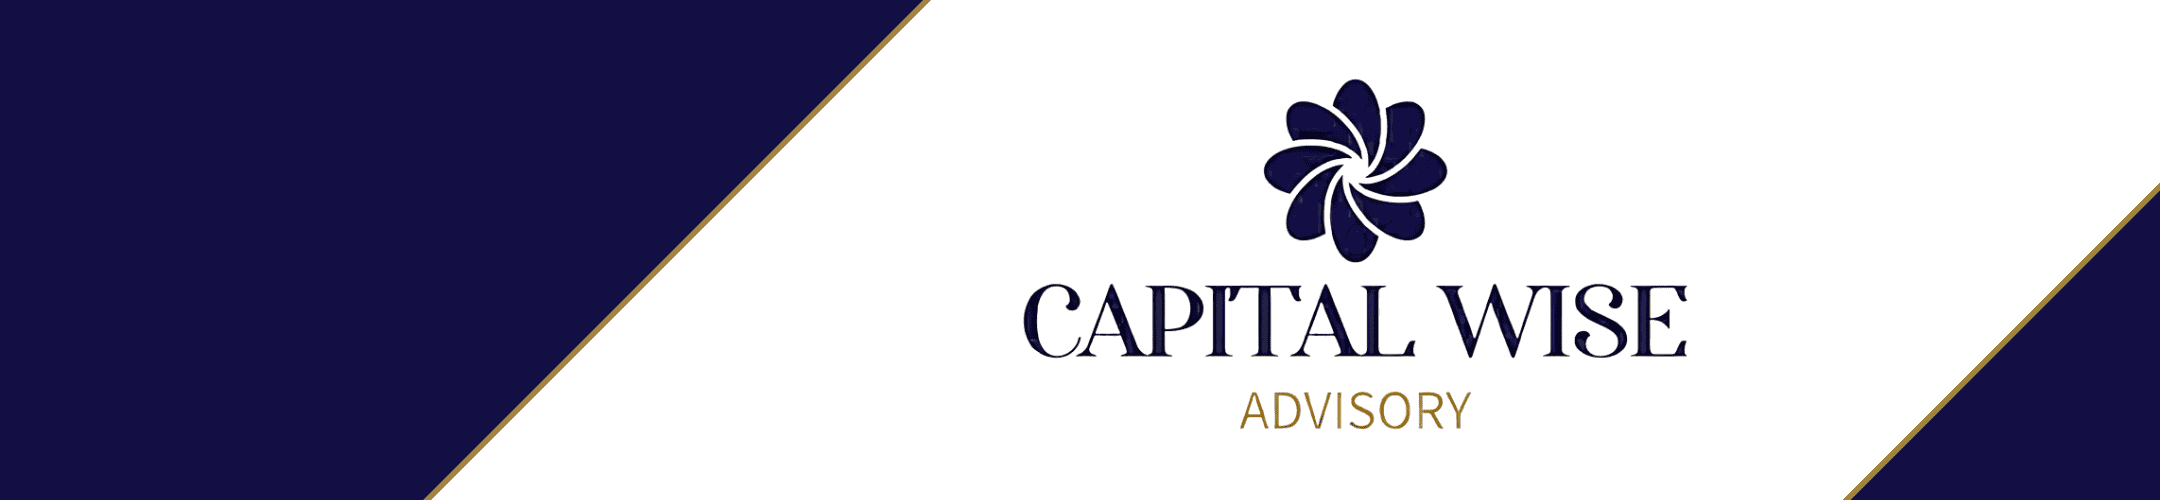 Logo of Capital Wise Advisory. The design includes a dark blue flower-shaped emblem above the company name in dark blue, with 